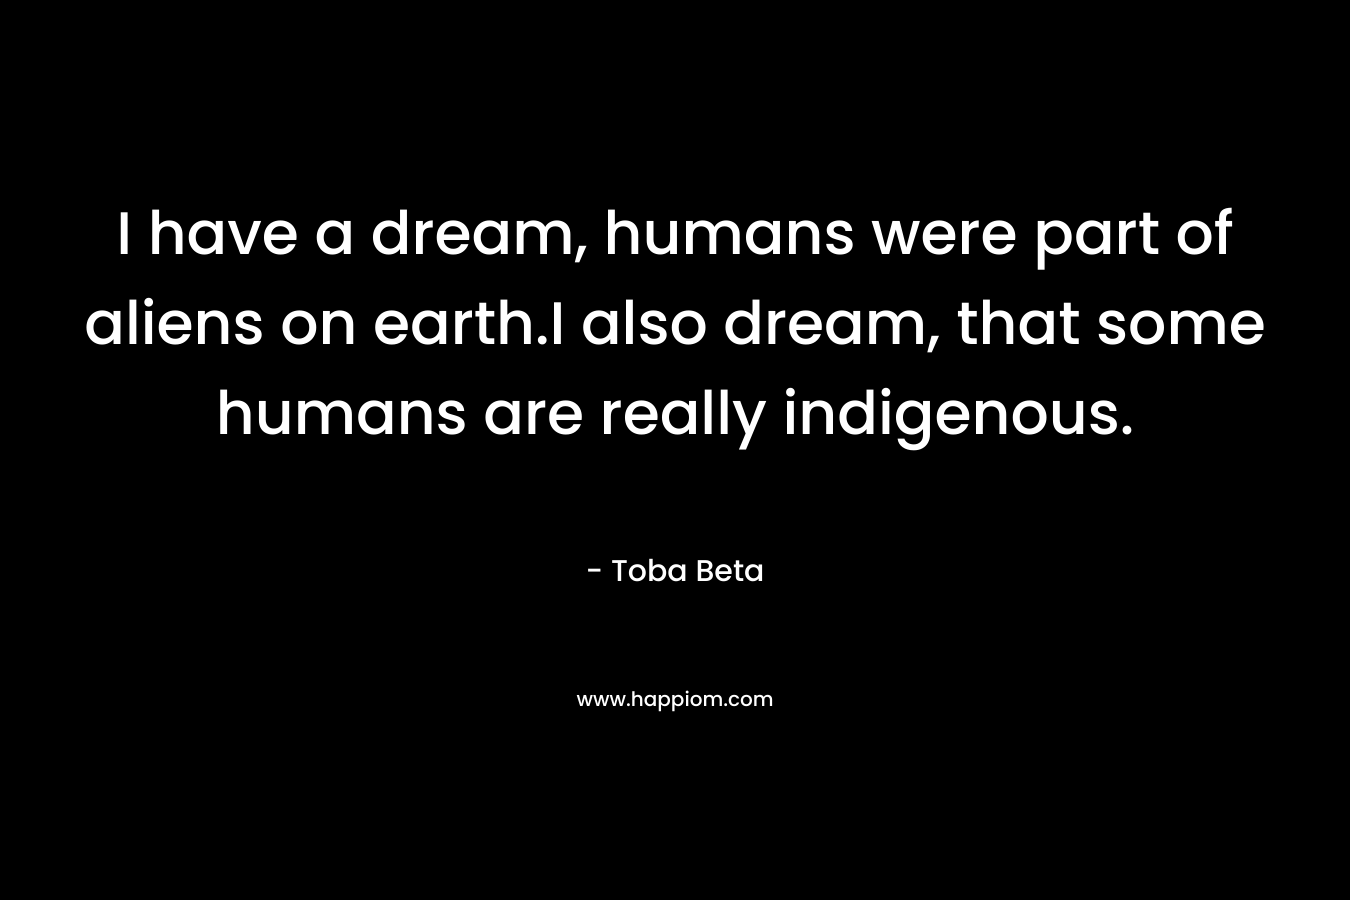 I have a dream, humans were part of aliens on earth.I also dream, that some humans are really indigenous.